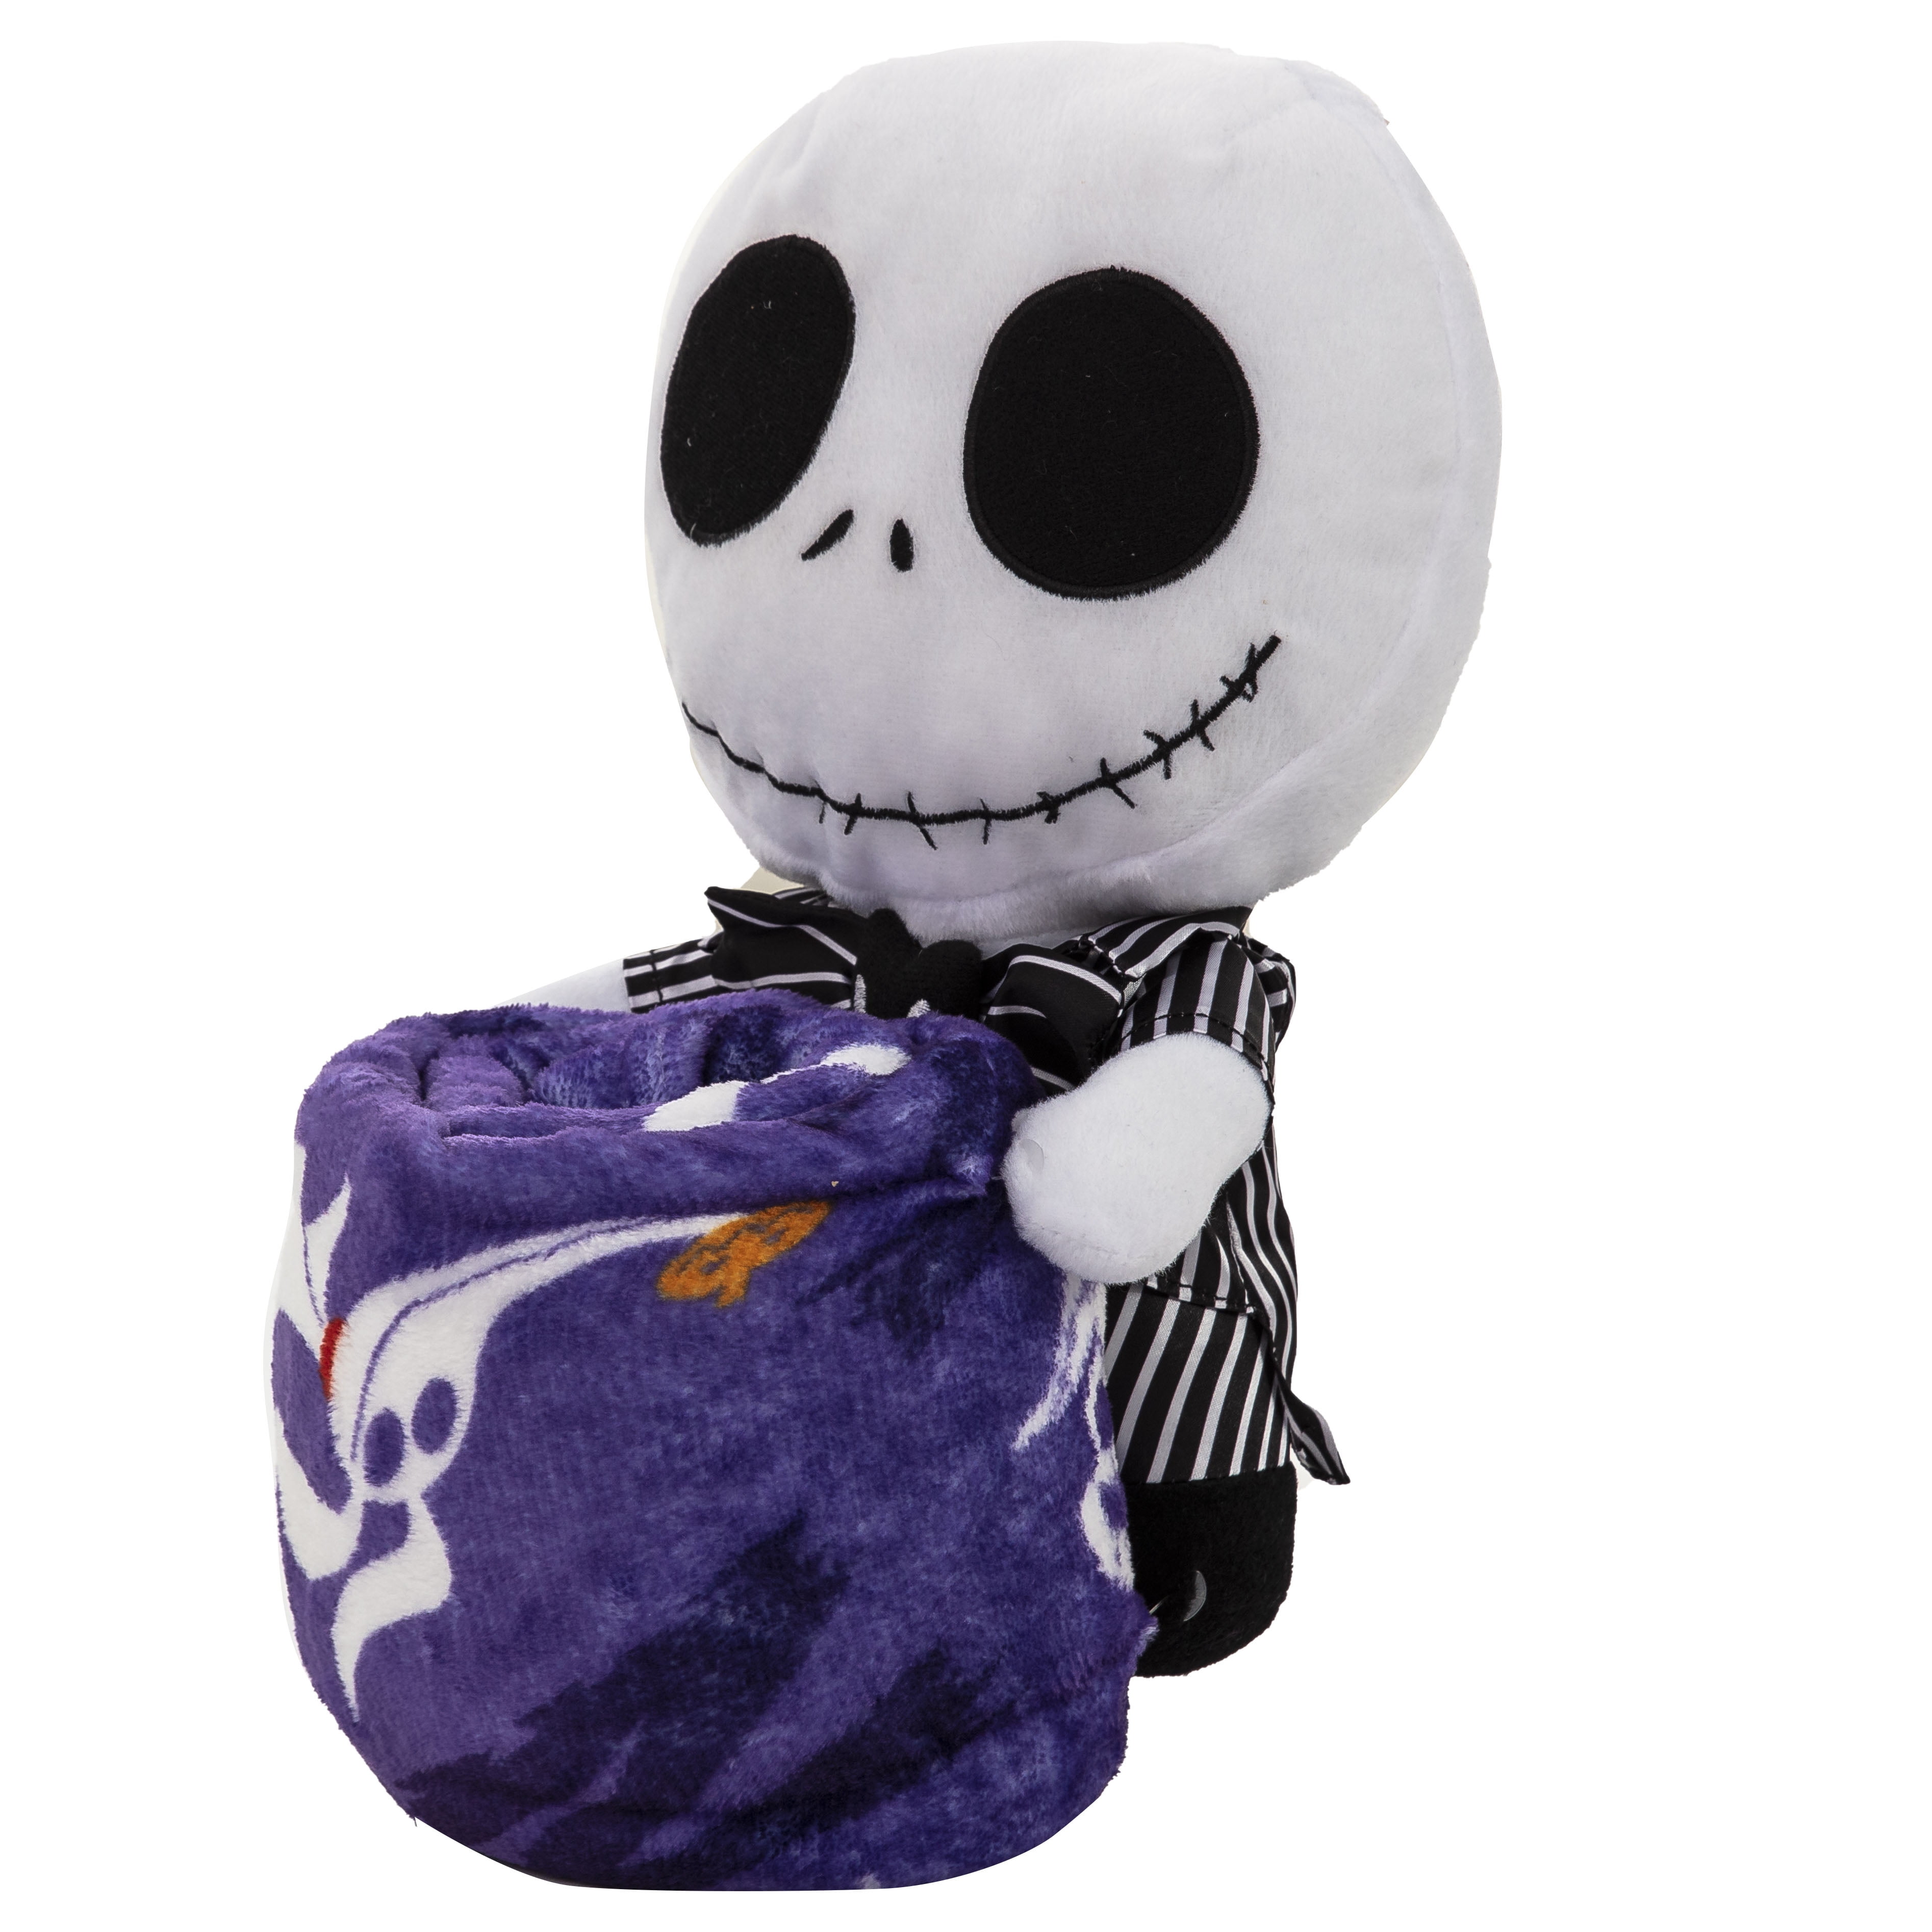 Nightmare before Christmas mixed character kitchen set 